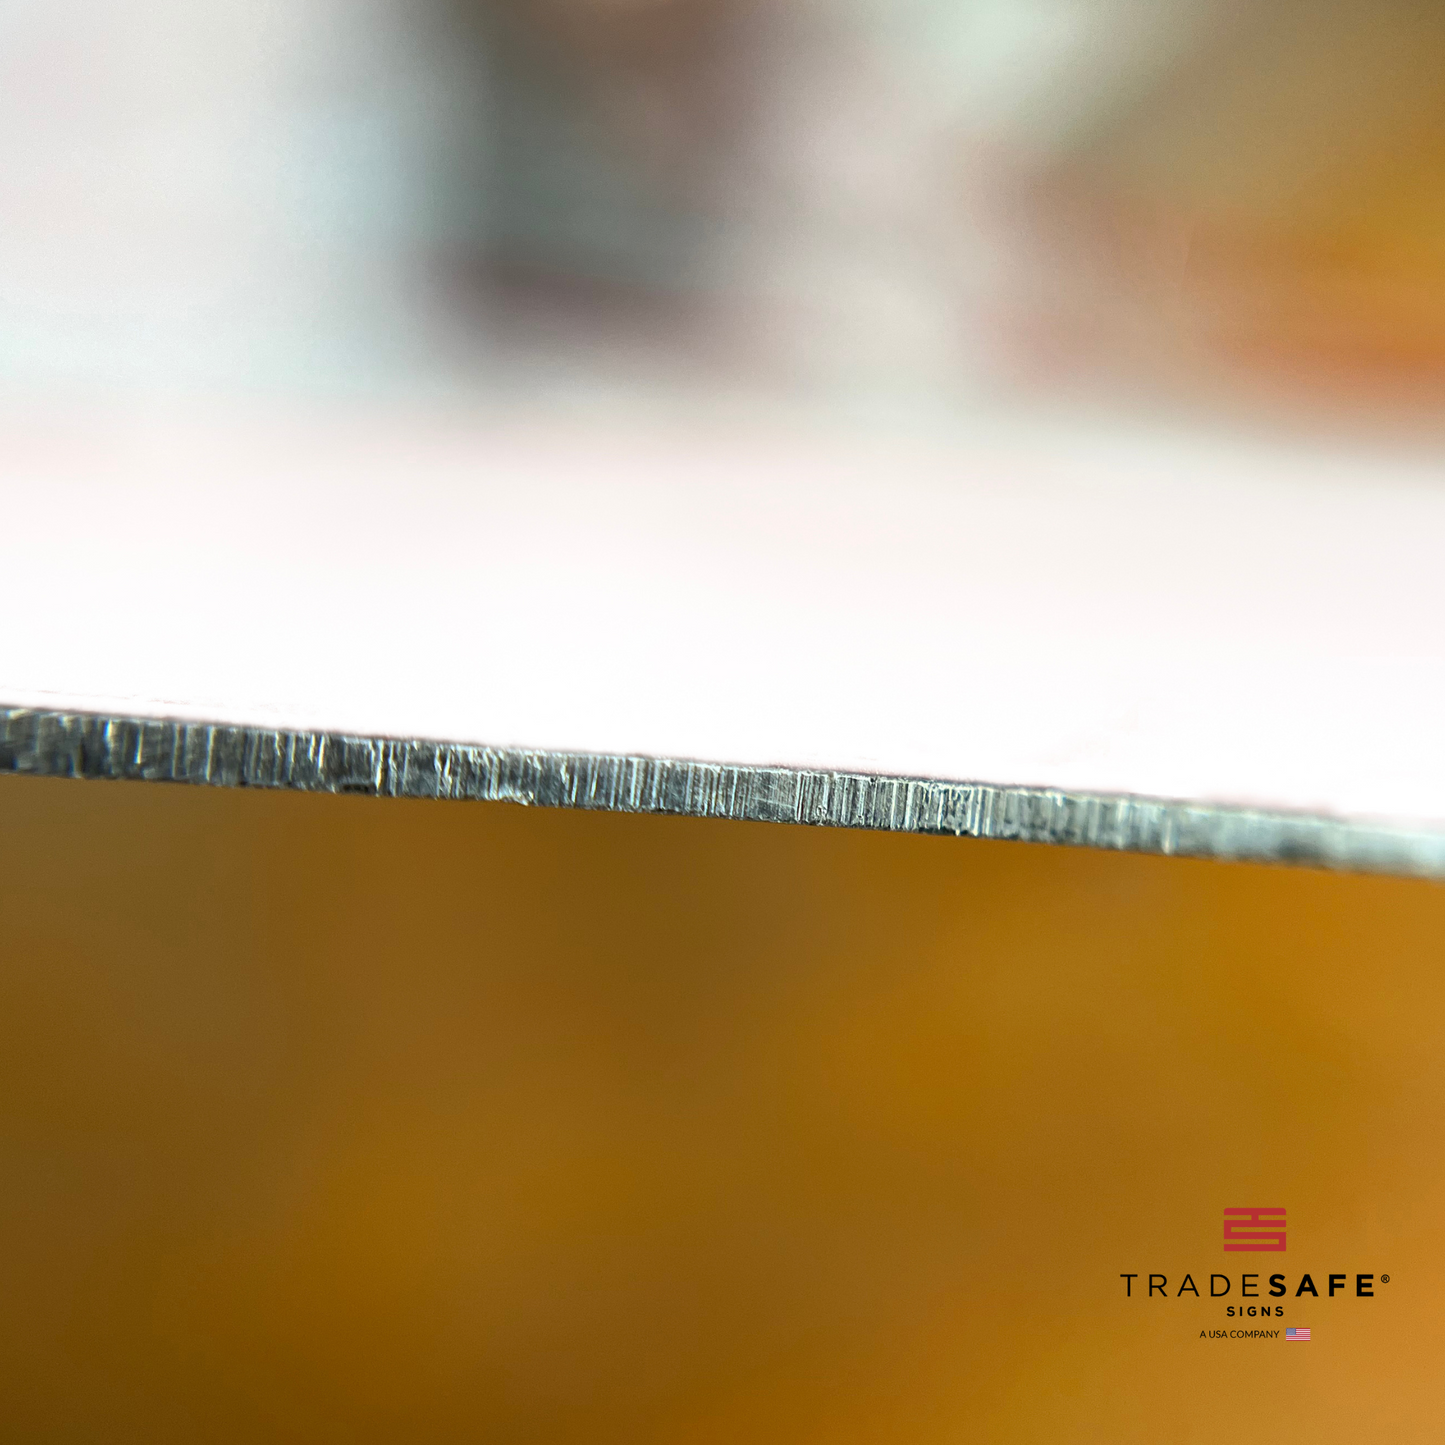 thickness of tradesafe's aluminum sign